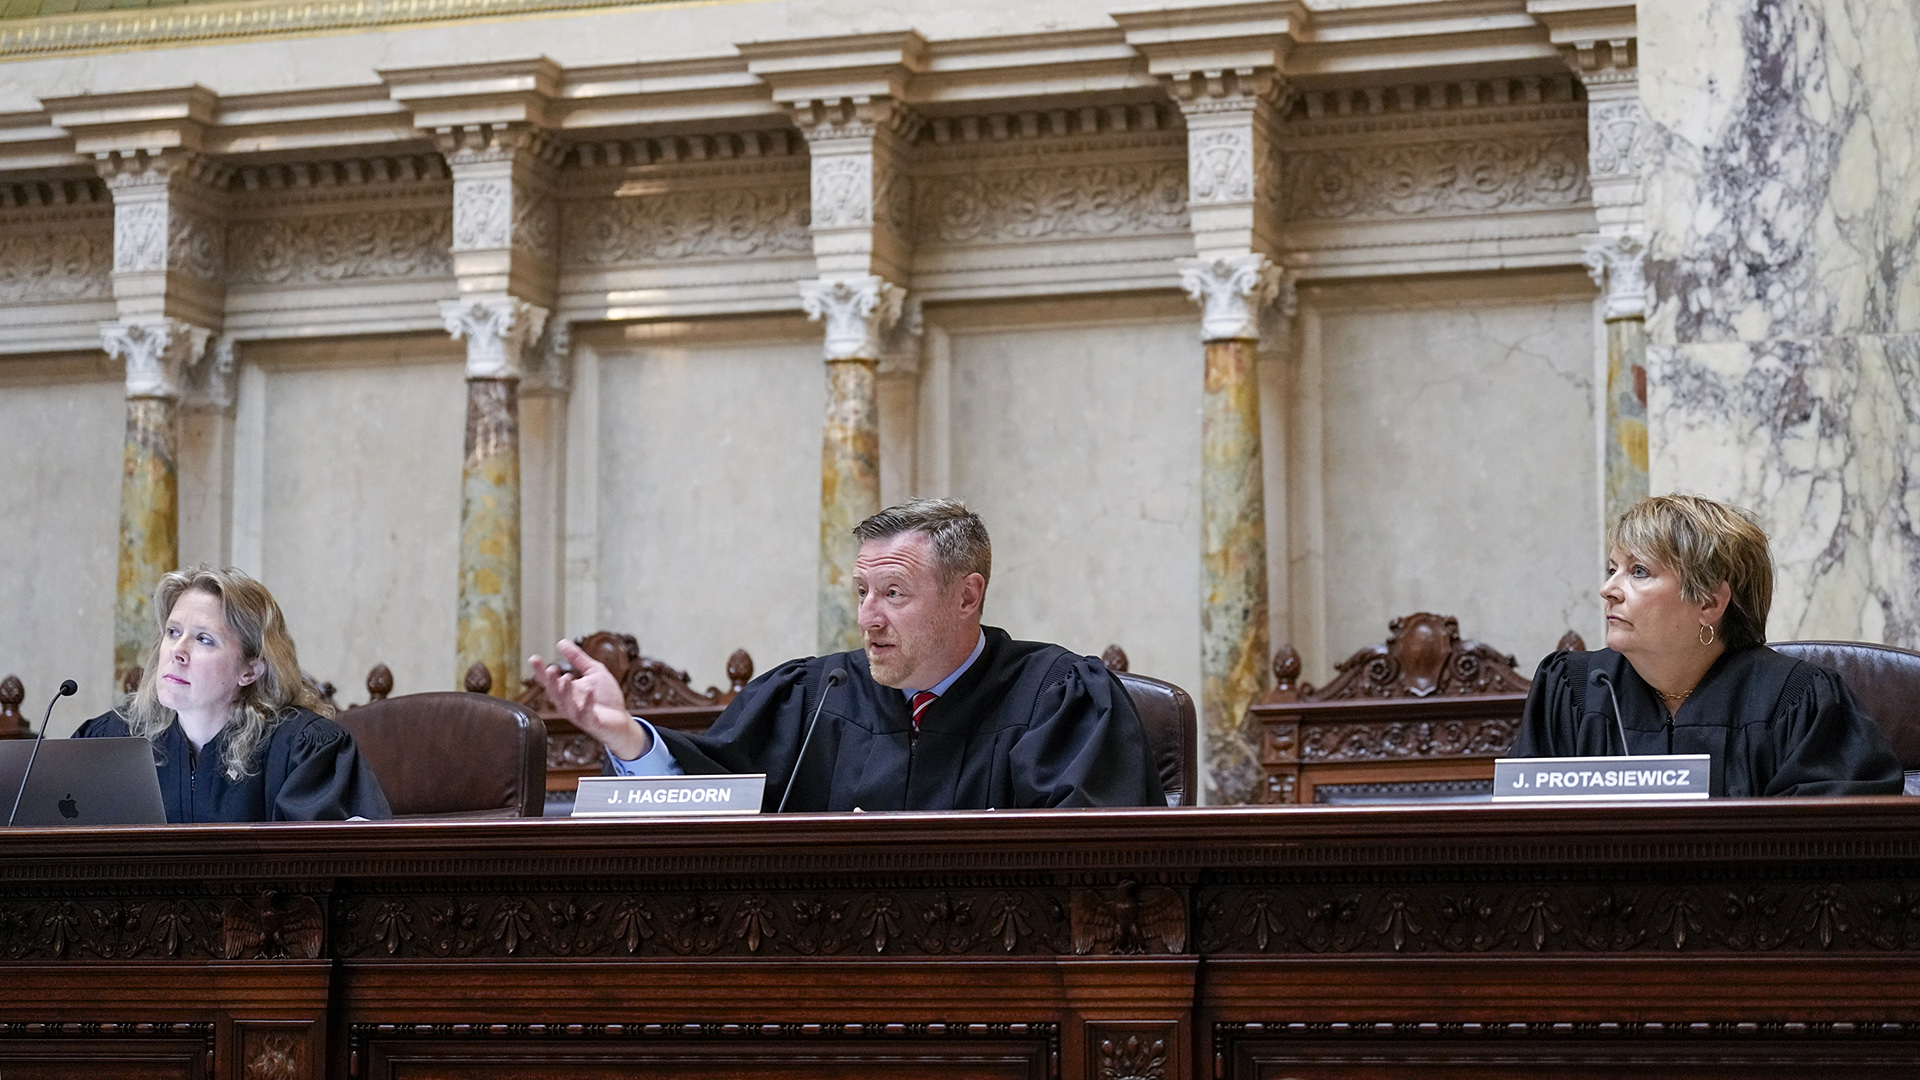 Brian Hagedorn gestures with his right hand while sitting at a judicial dais, with Rebecca Bradley and Janet Protasiewicz seated on either side, in a room with marble masonry and pillars.